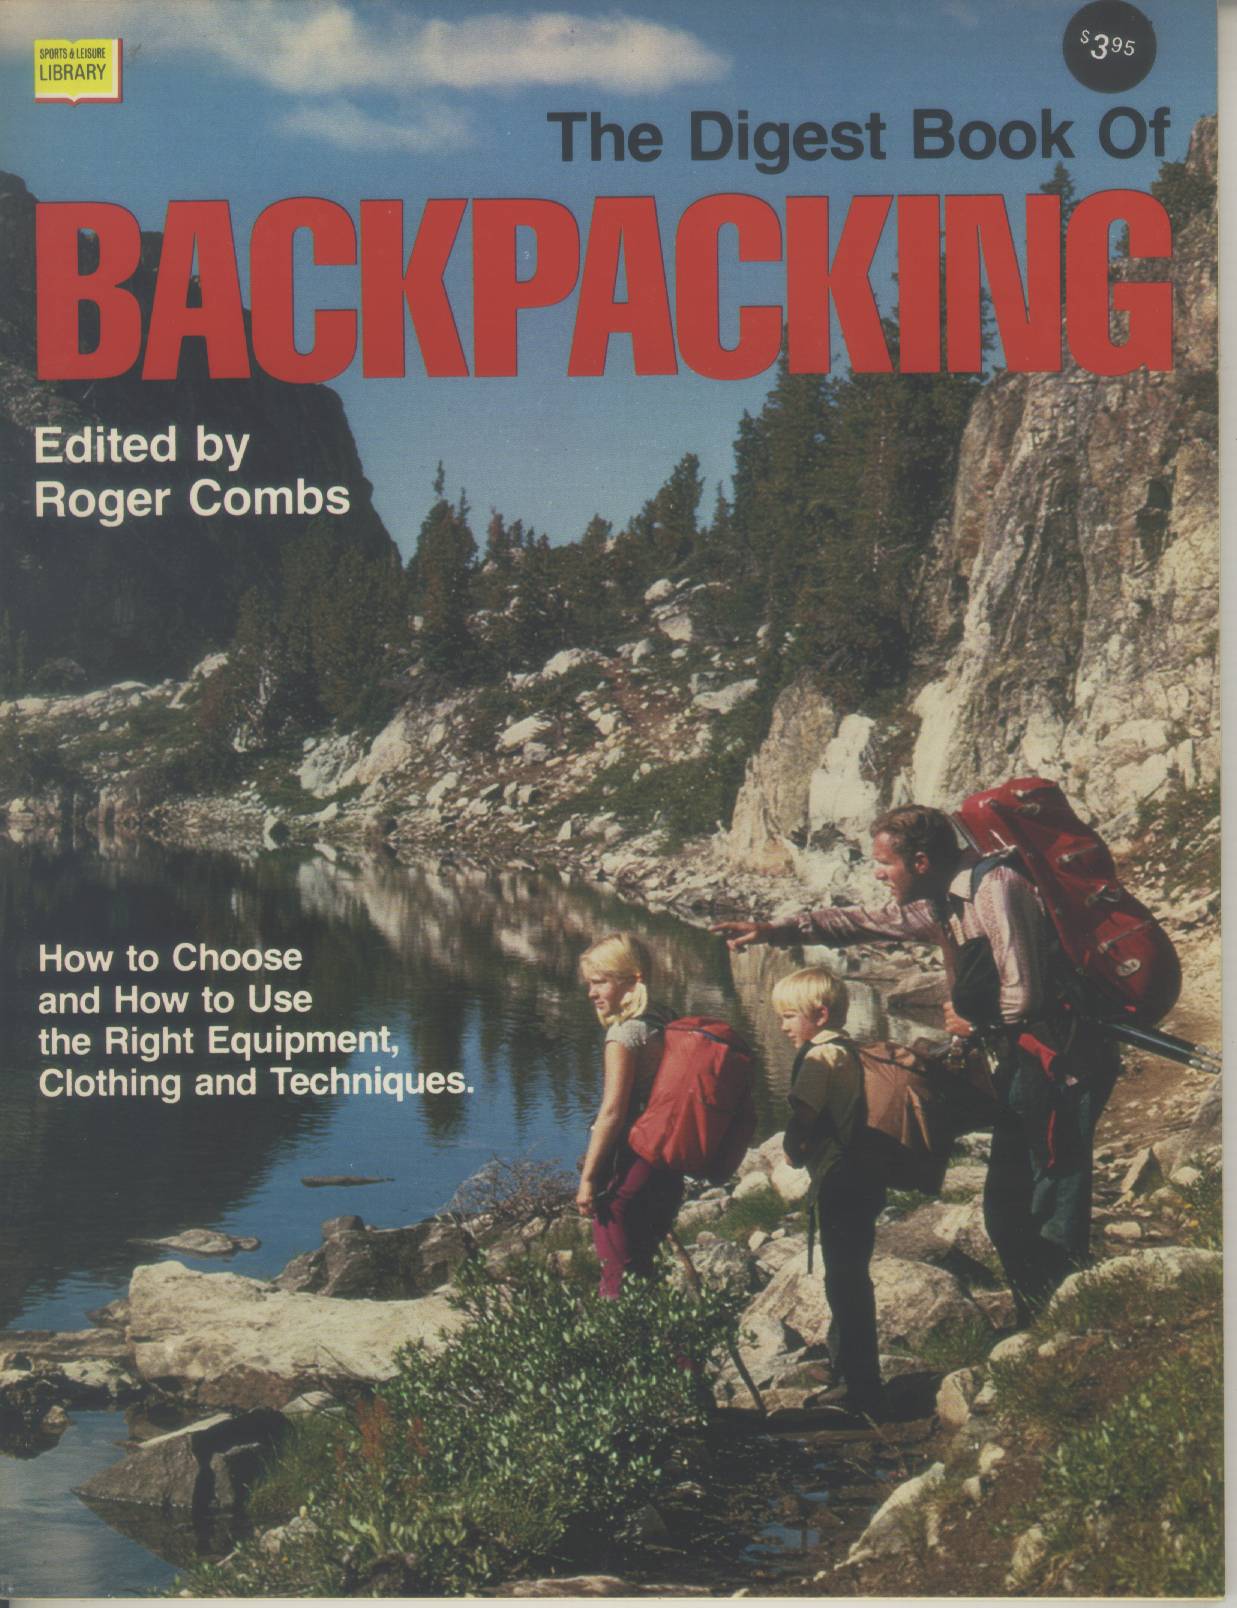 THE DIGEST BOOK OF BACKPACKING.